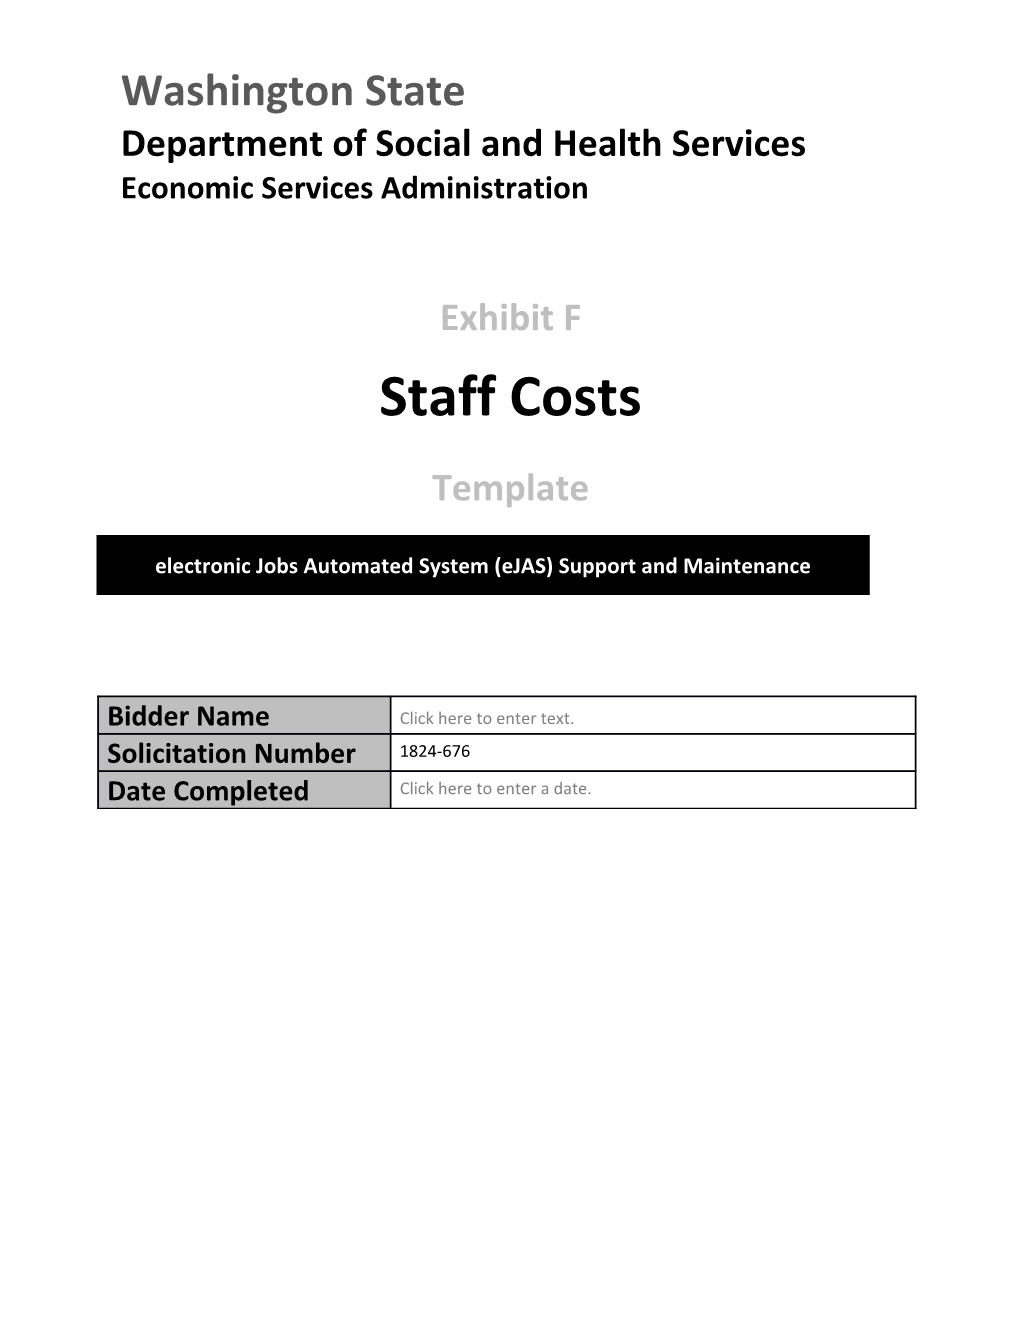 1824-676Exhibit F - Staff Costs - Template (Ejas)